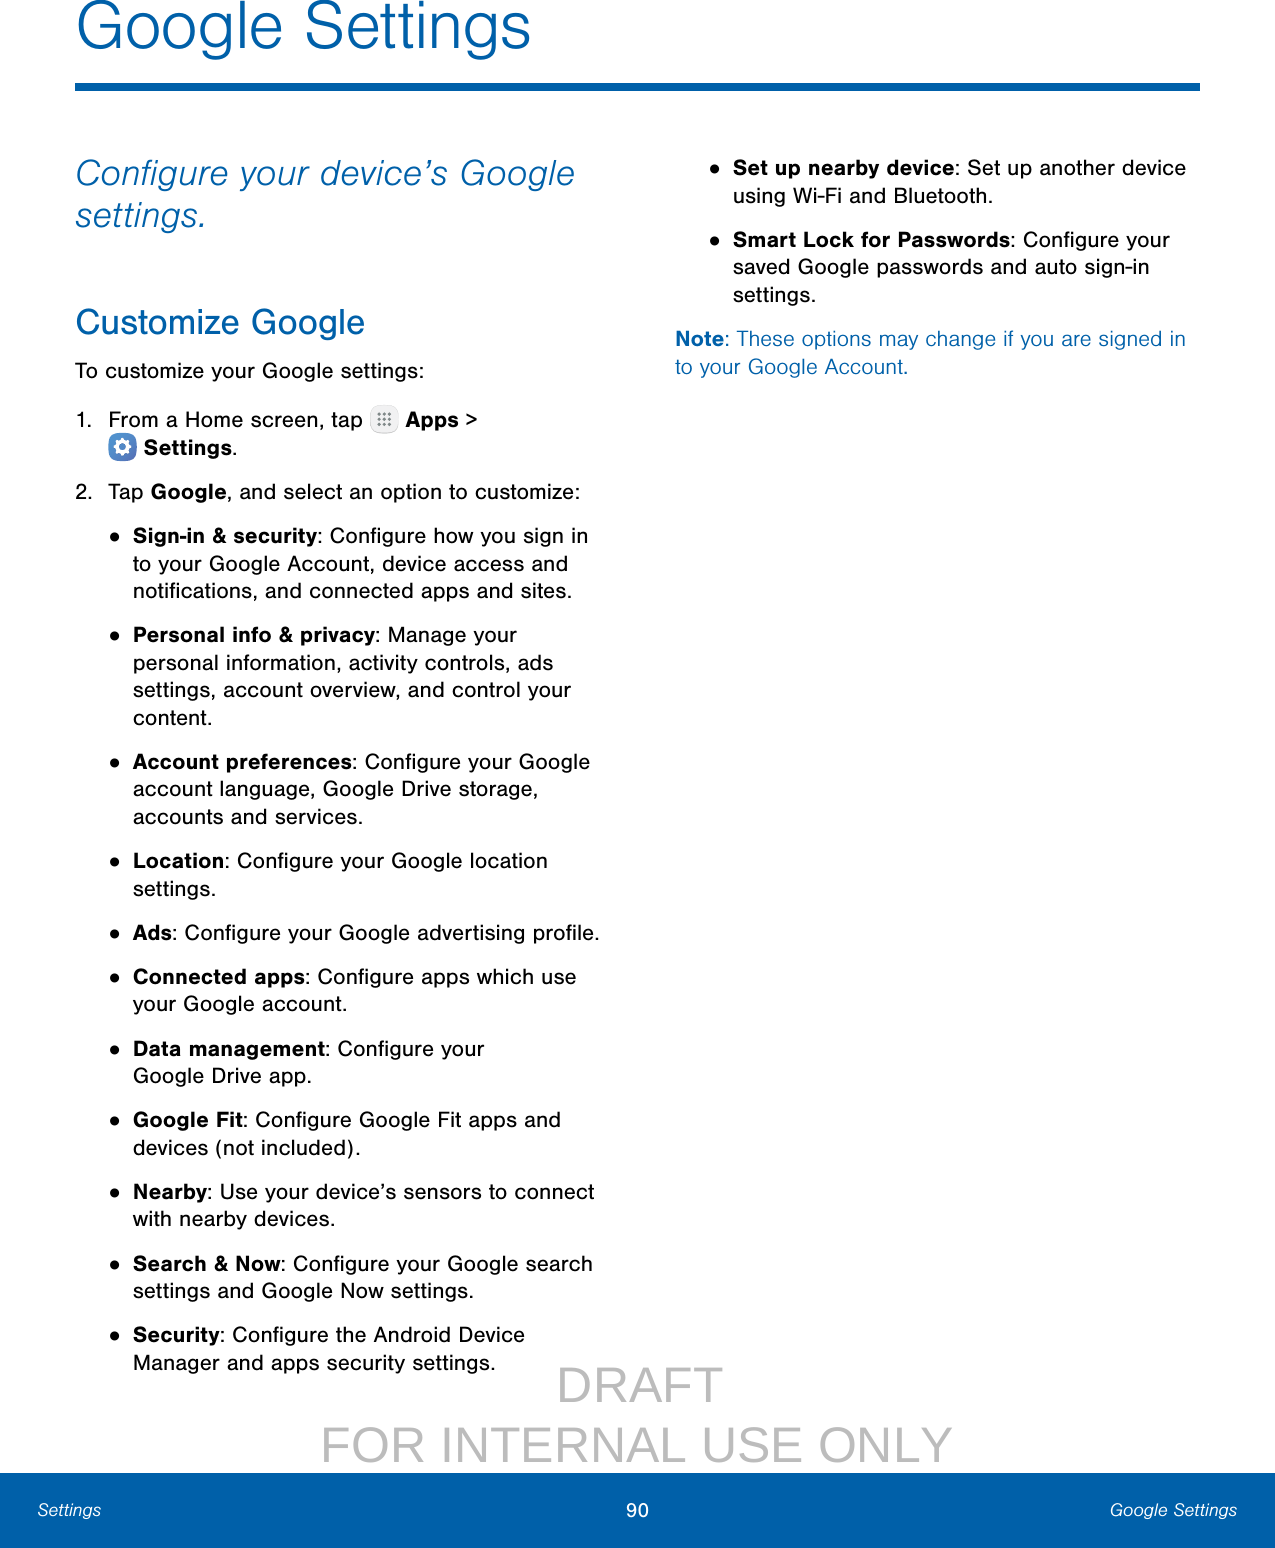                  DRAFT FOR INTERNAL USE ONLY90 Google SettingsSettingsGoogle SettingsConﬁgure your device’s Google settings.Customize GoogleTo customize your Google settings:1.  From a Home screen, tap   Apps &gt; Settings.2.  Tap Google, and select an option to customize:• Sign-in &amp; security: Conﬁgure how you sign in to your Google Account, device access and notiﬁcations, and connected apps and sites.• Personal info &amp; privacy: Manage your personal information, activity controls, ads settings, account overview, and control your content.• Account preferences: Conﬁgure your Google account language, Google Drive storage, accounts and services.• Location: Conﬁgure your Google location settings.• Ads: Conﬁgure your Google advertising proﬁle.• Connected apps: Conﬁgure apps which use your Google account.• Data management: Conﬁgure your GoogleDrive app.• Google Fit: Conﬁgure Google Fit apps and devices (not included).• Nearby: Use your device’s sensors to connect with nearby devices.• Search &amp; Now: Conﬁgure your Google search settings and Google Now settings.• Security: Conﬁgure the Android Device Manager and apps security settings.• Set up nearby device: Set up another device using Wi‑Fi and Bluetooth.• Smart Lock for Passwords: Conﬁgure your saved Google passwords and auto sign‑in settings.Note: These options may change if you are signed in to your Google Account.